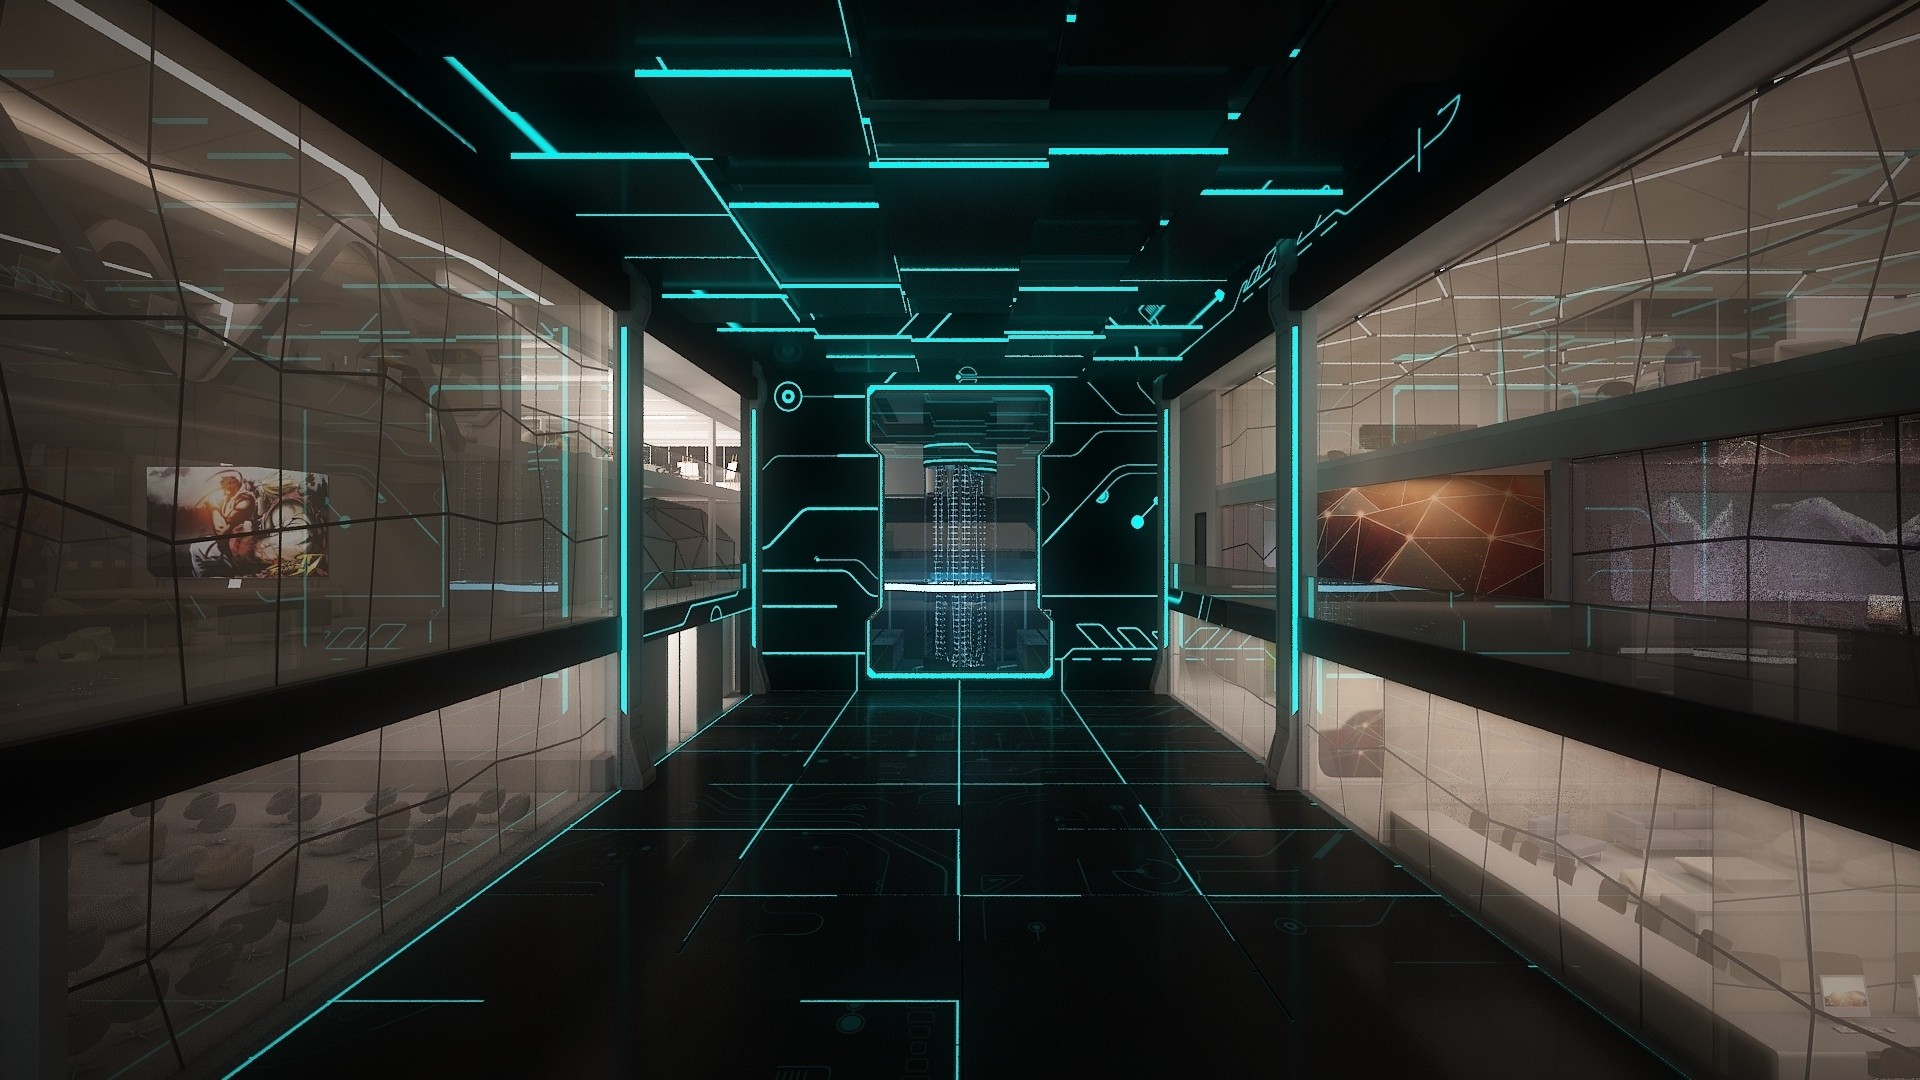 1920x1080 Futuristic Room With Glass Windows 37838 73 69 Kb Staley Technology Sci Fi  Science Puter Wallpaper ...